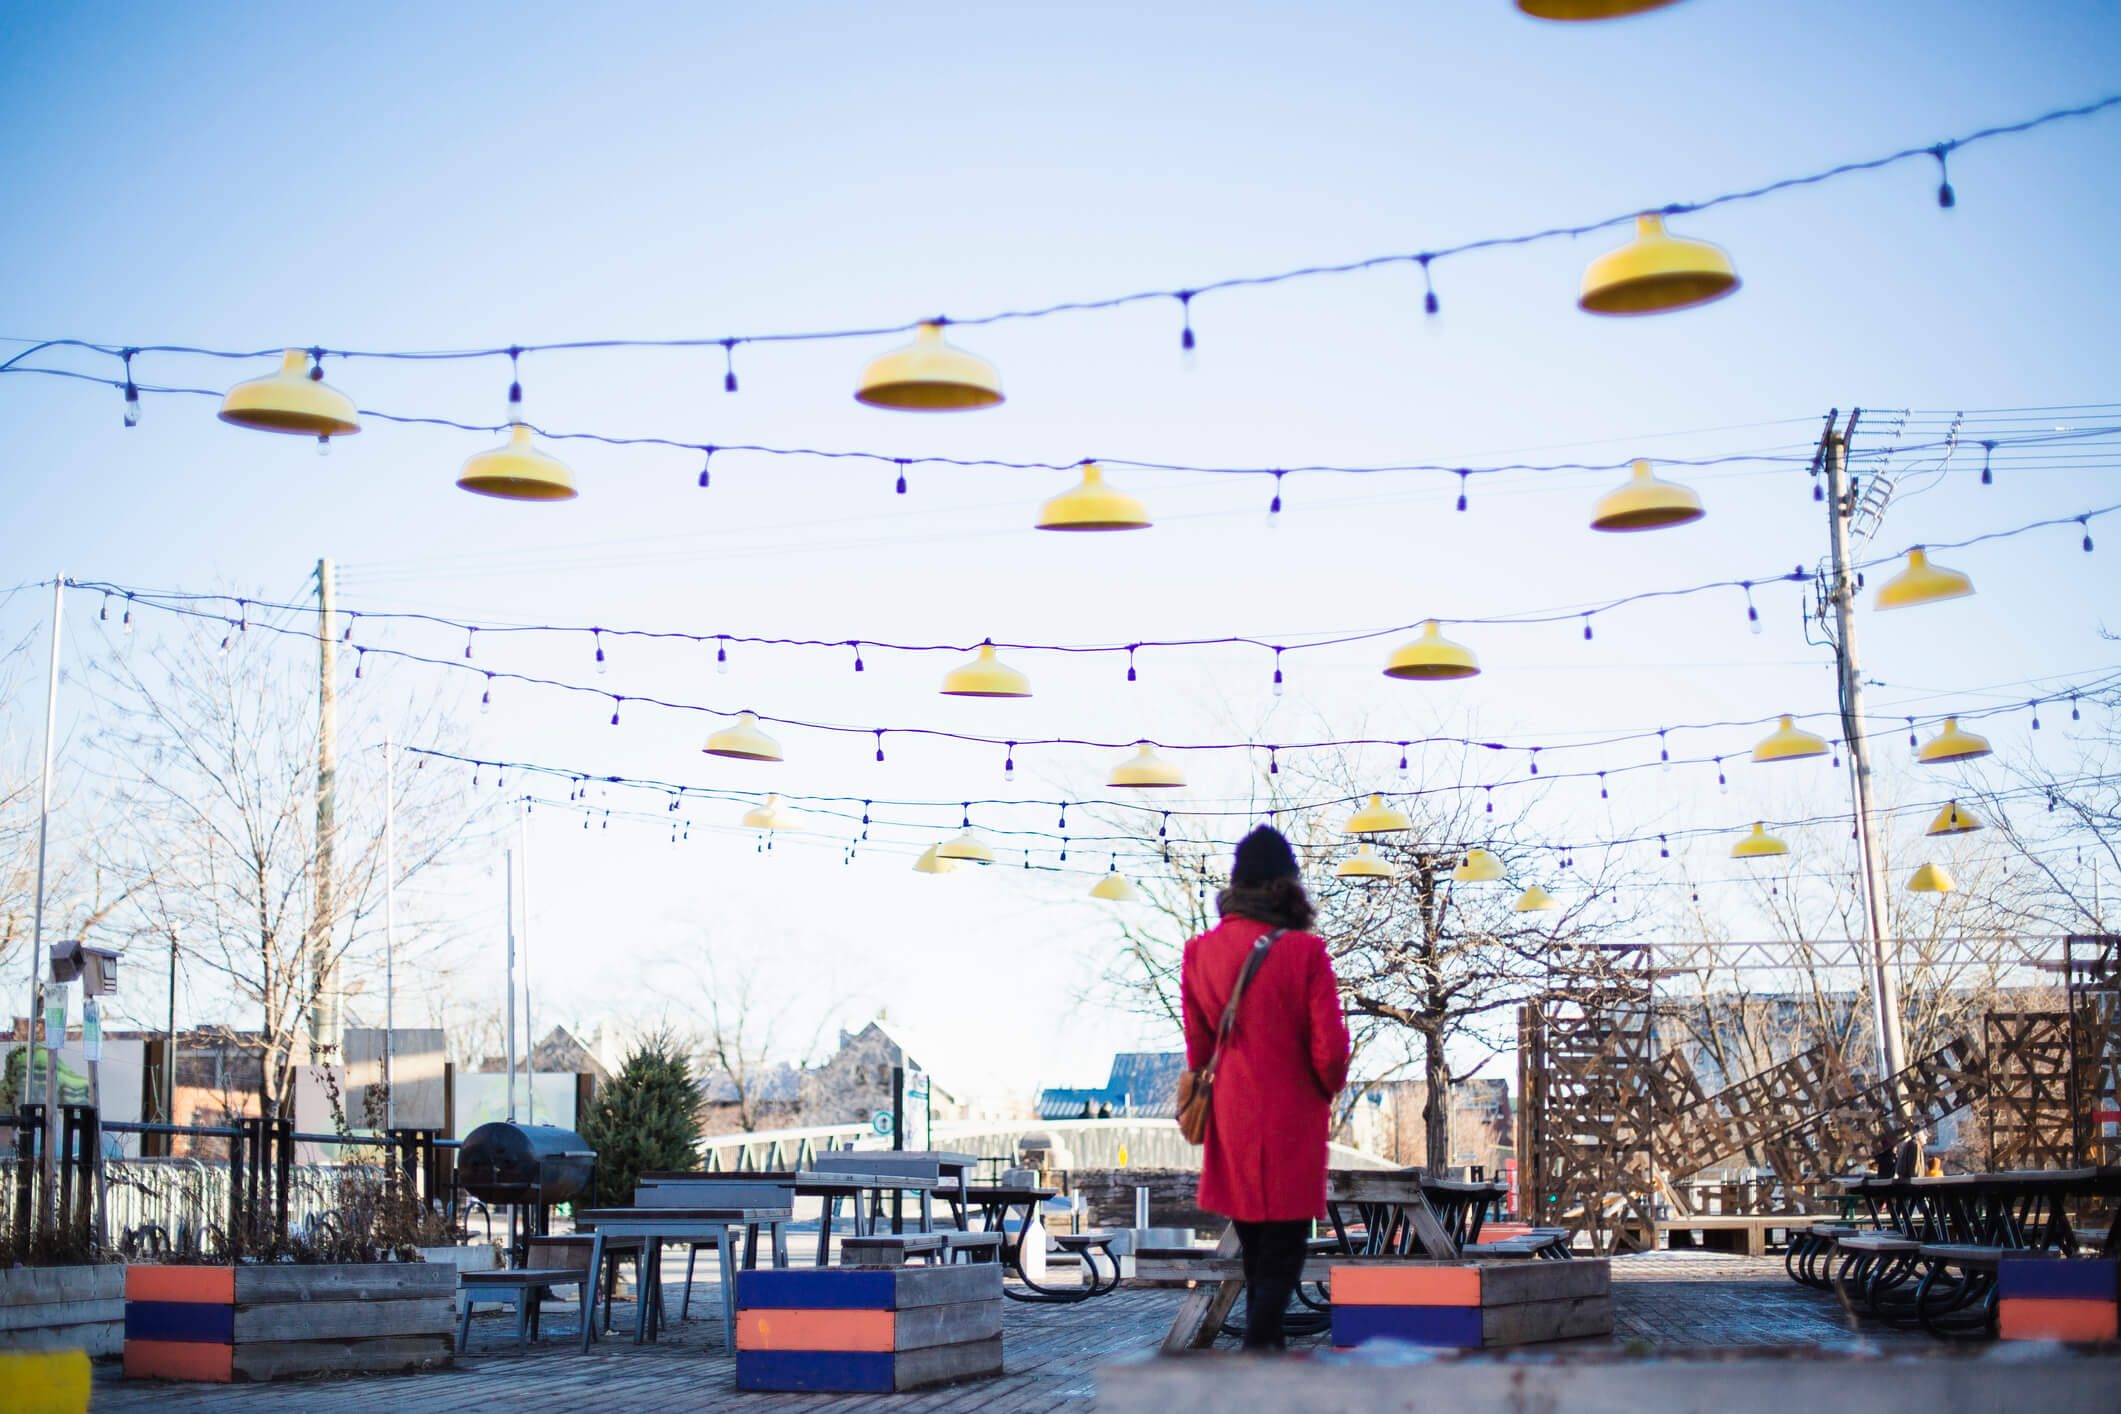 A person in a red coat stands in front of empty picnic tables and string lights